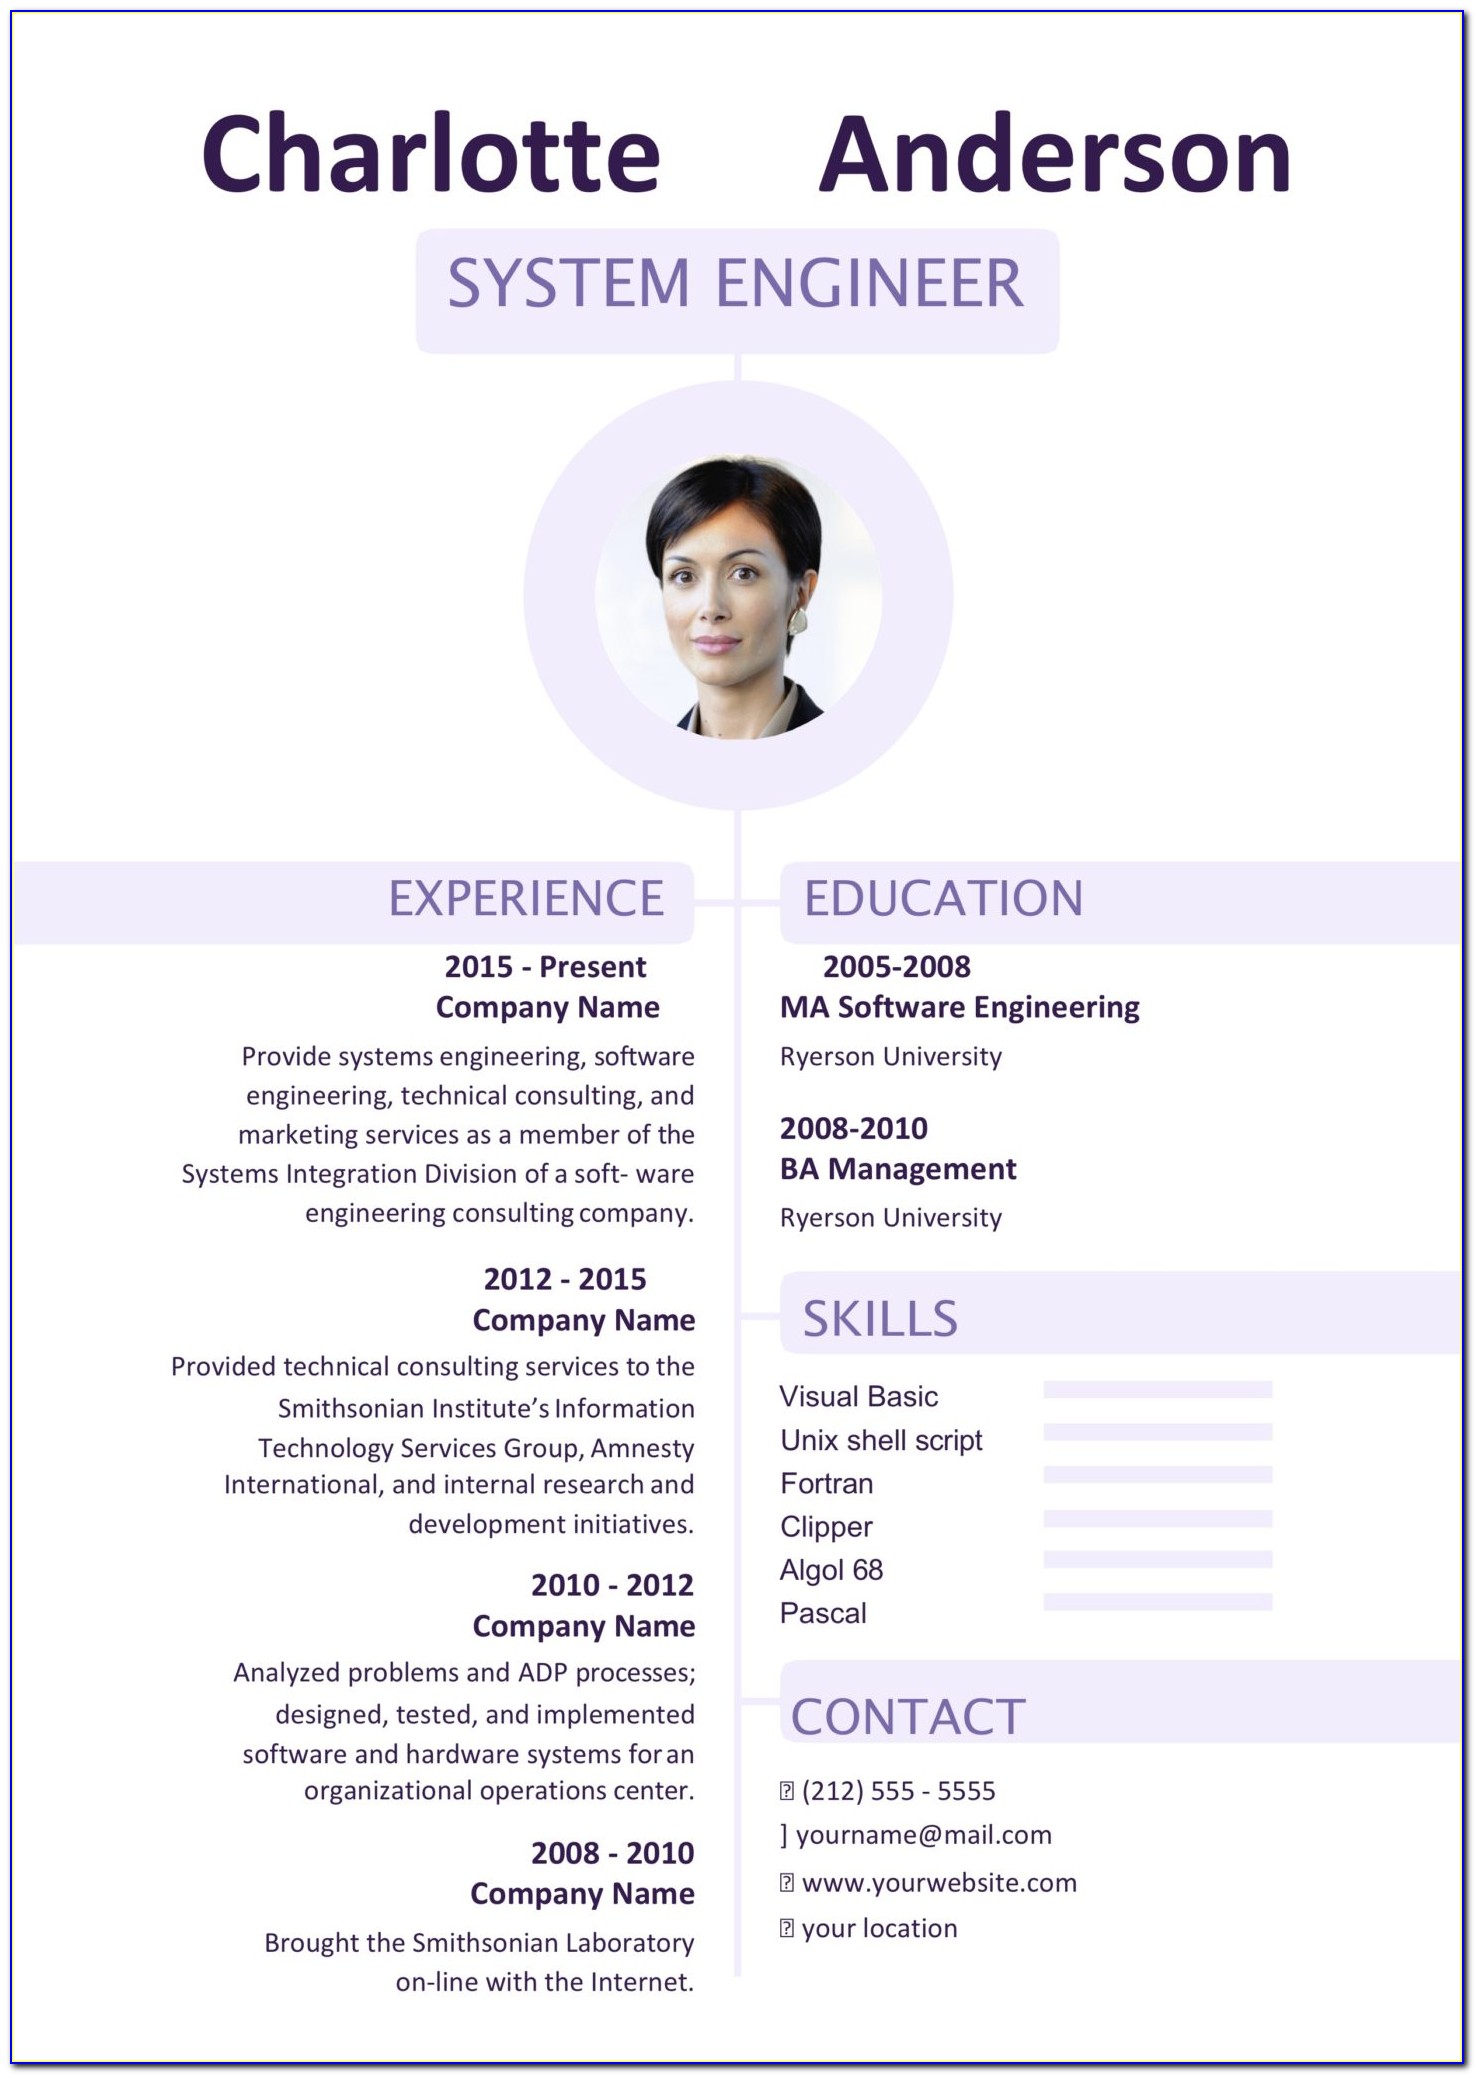 Sample Resume Philippines Format Download